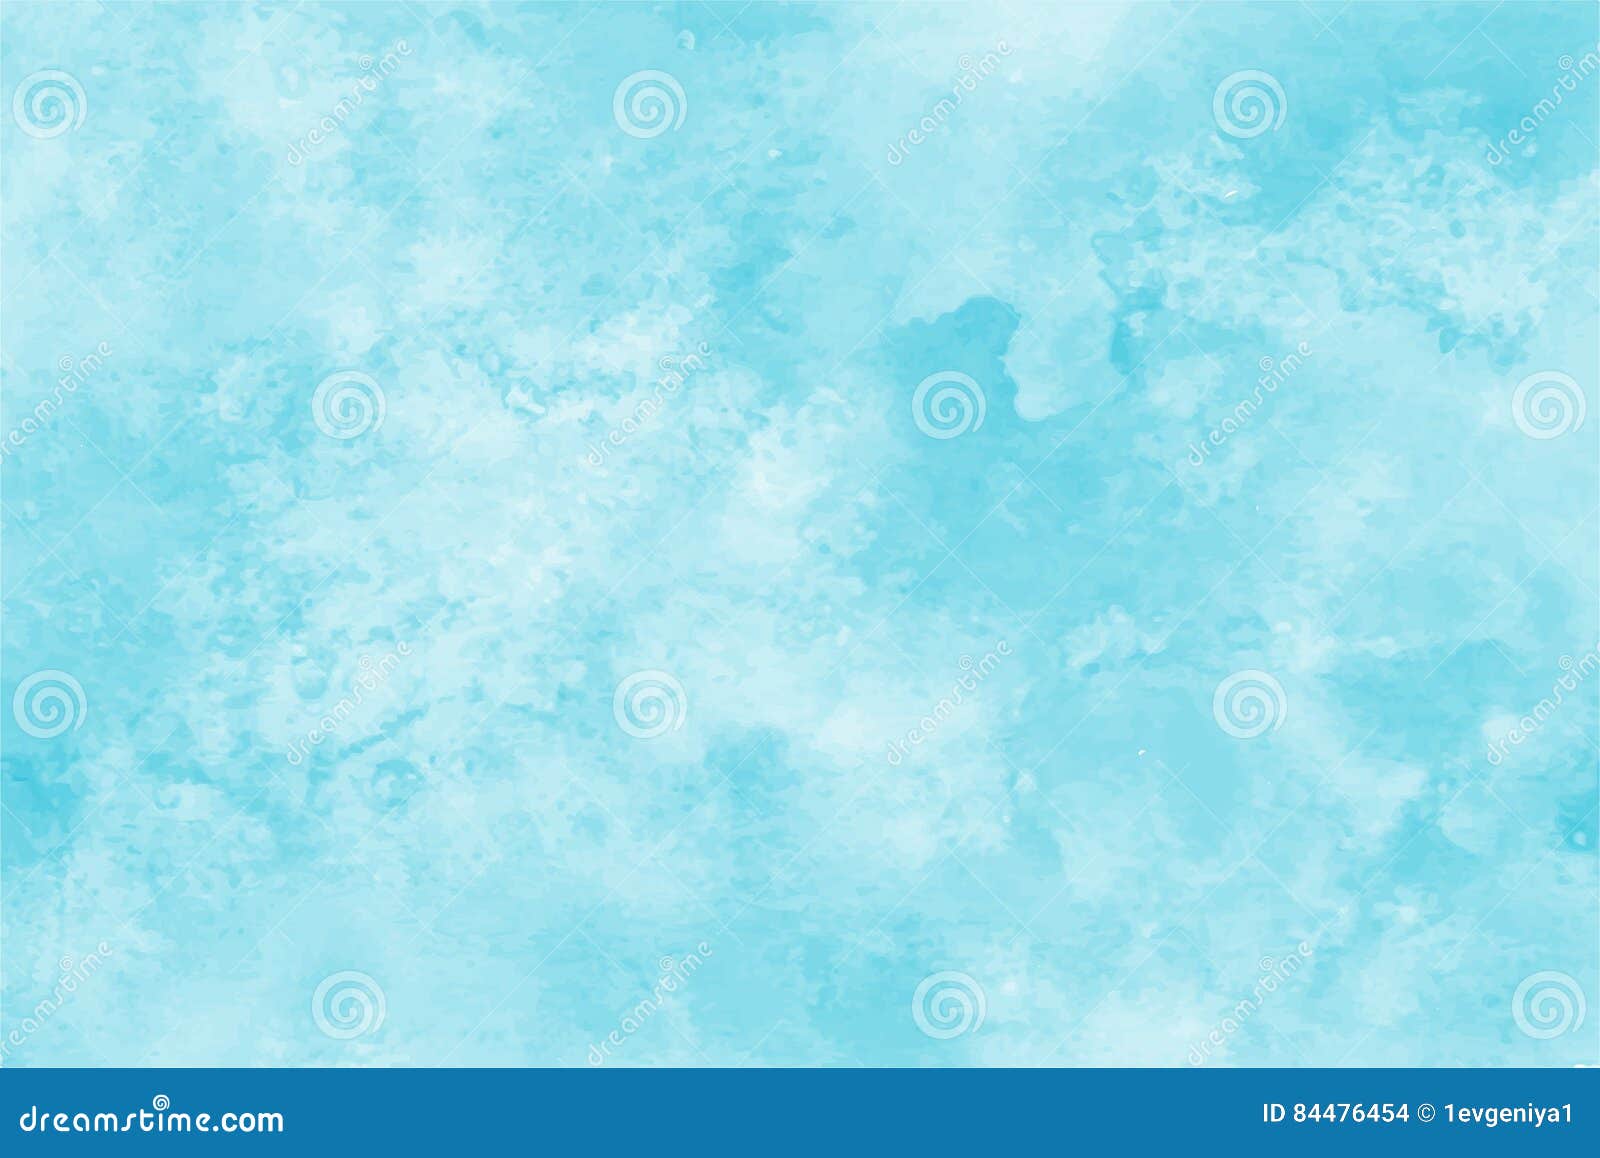 blue watercolor background. abstract hand paint square stain backdrop